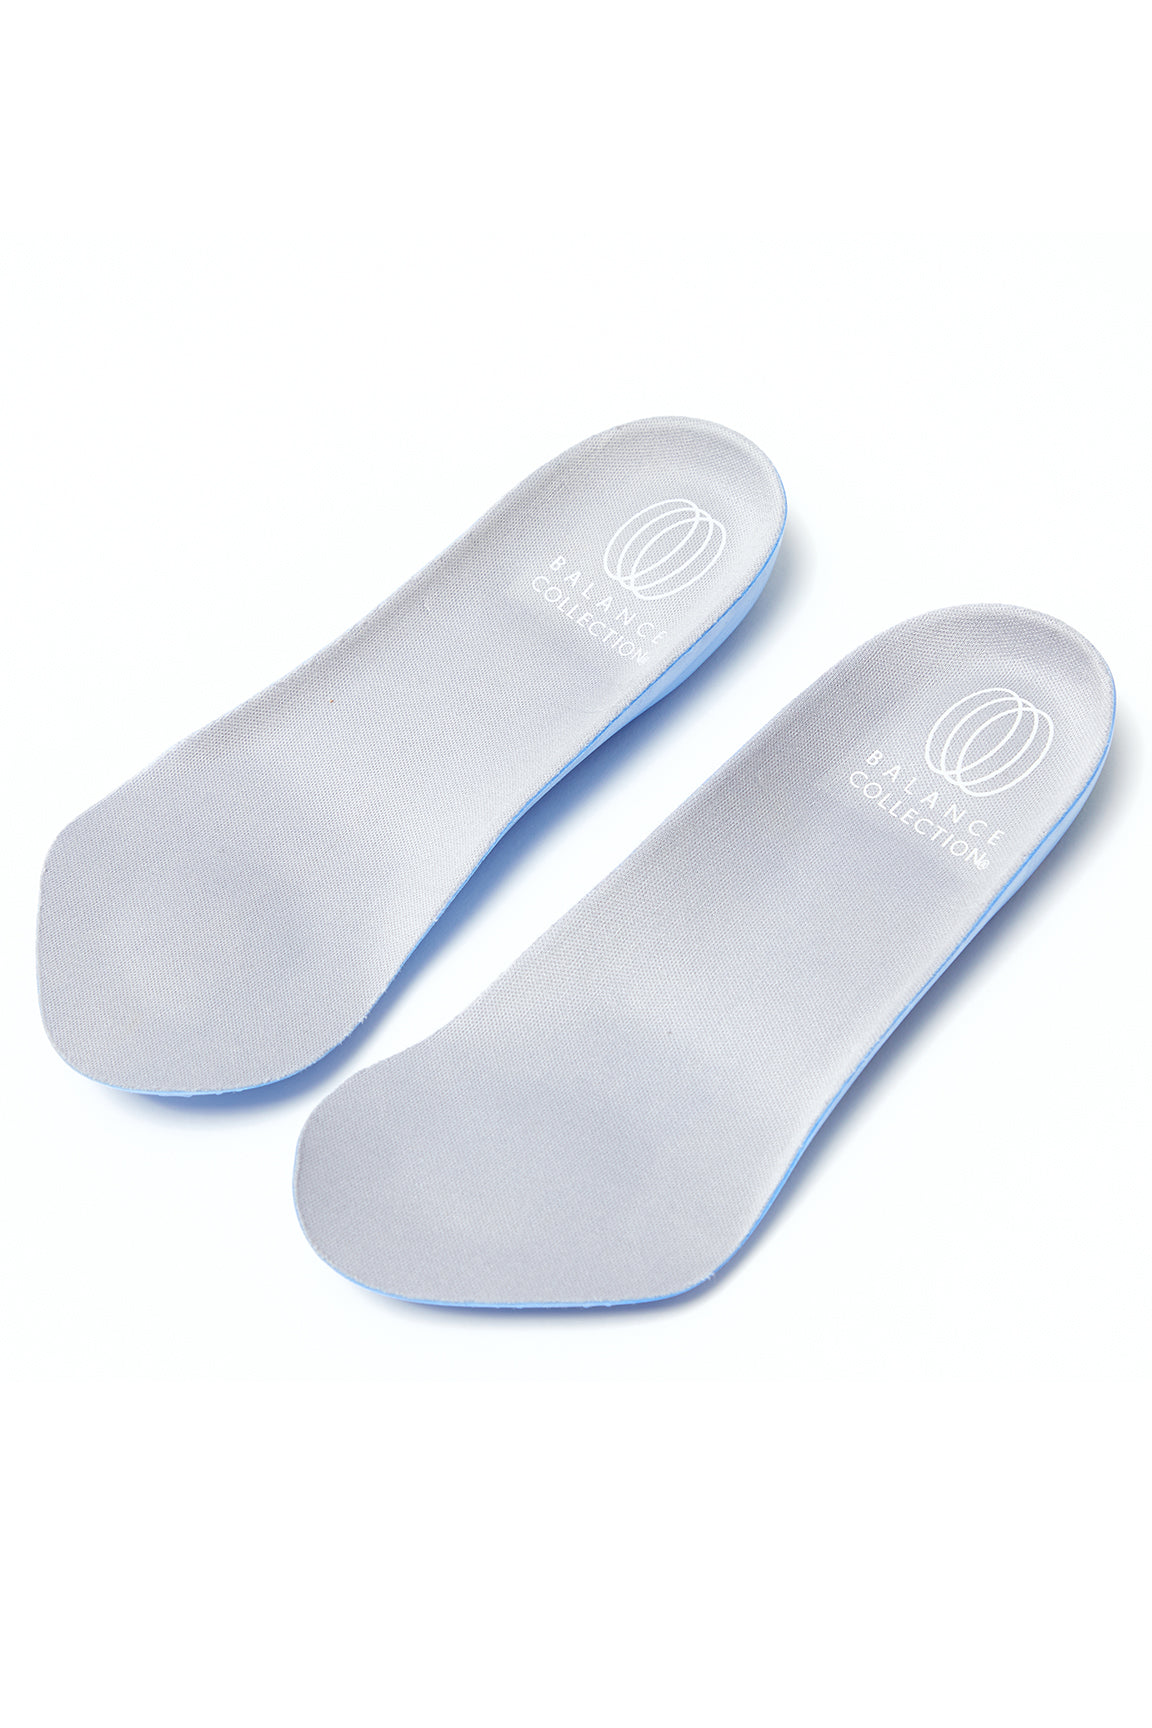 Foot Insoles (Serenity)